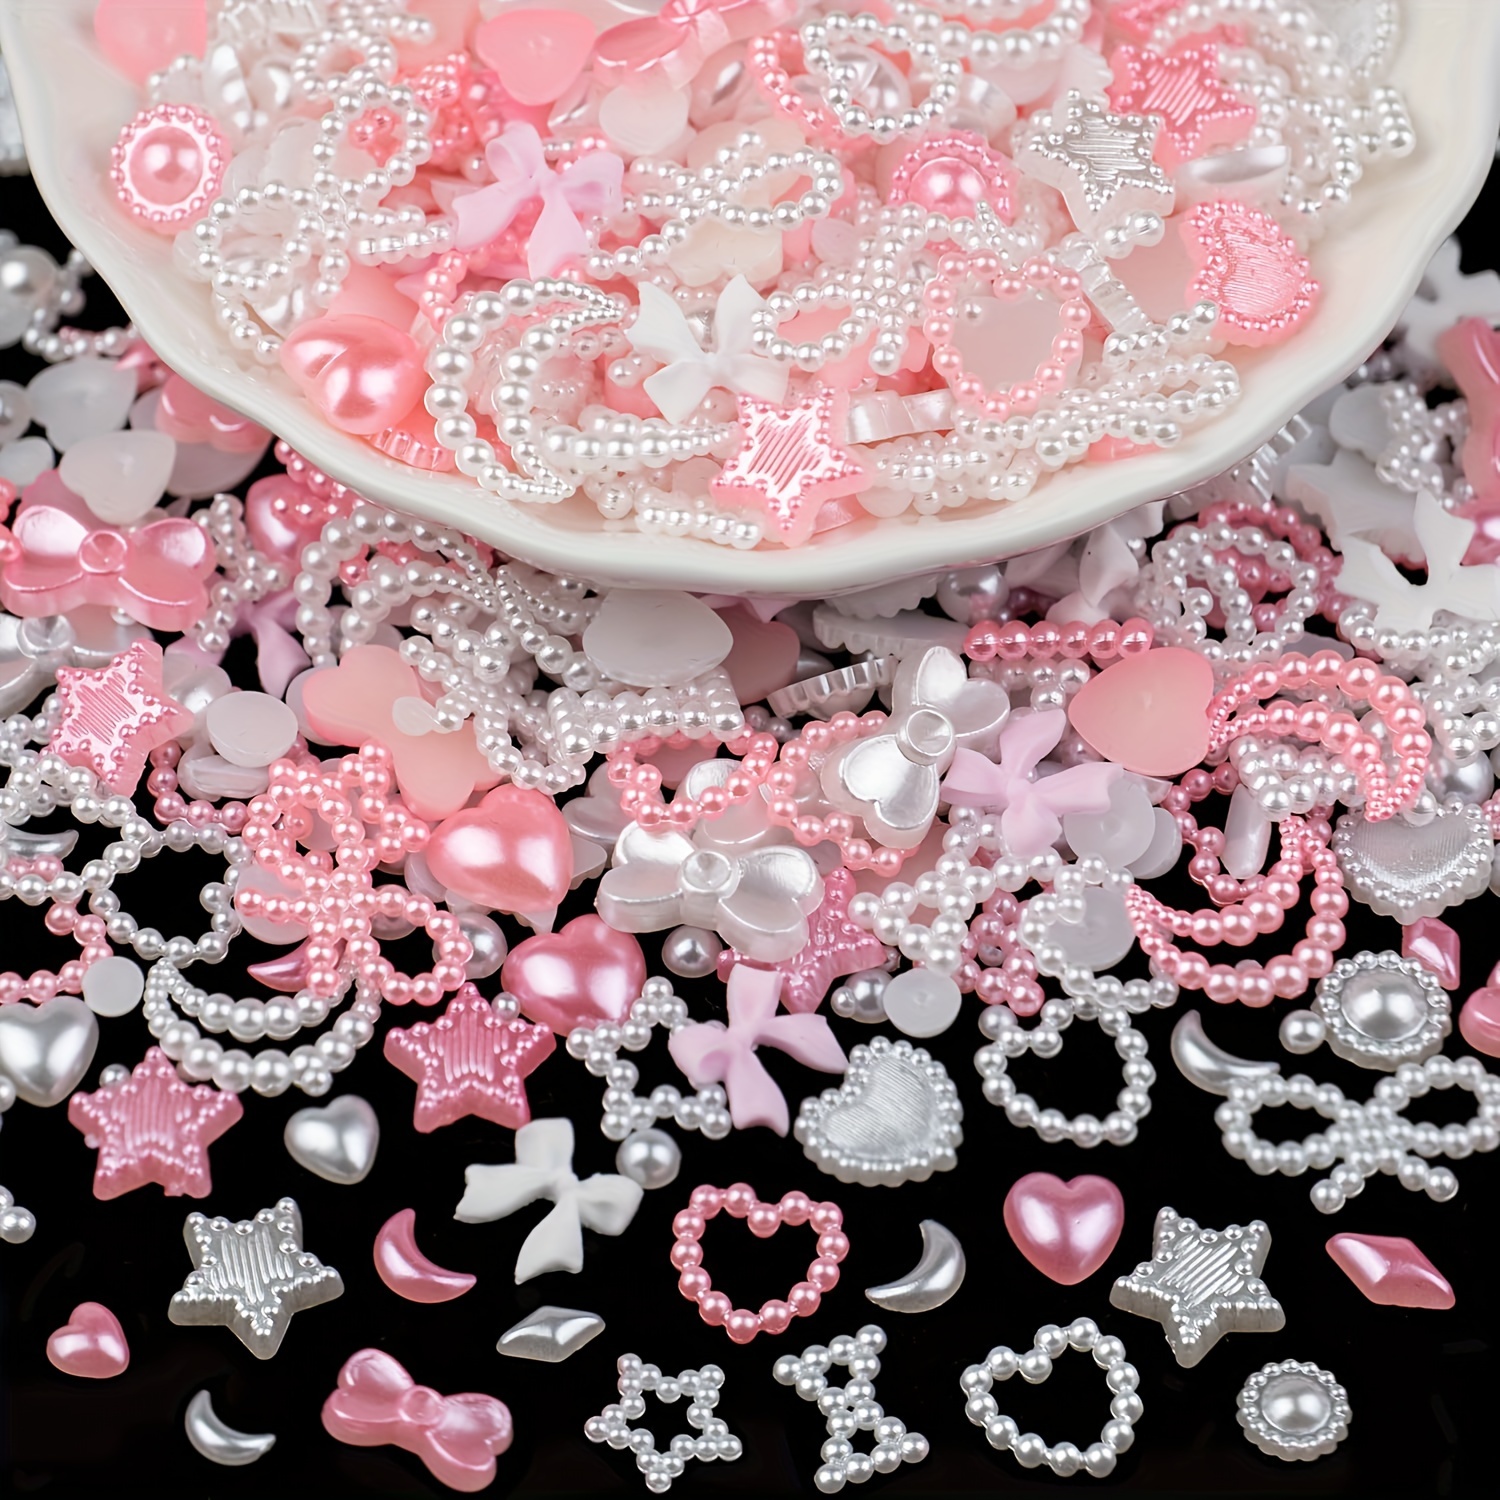 

1200pcs Assorted Pearls 3d Nail Charms Pink Multi Shapes Heart Bowknot Nail Charms Mix Heart Star Bows Round Pearls Nail Beads Charms For Manicure Crafts Jewelry Accessories